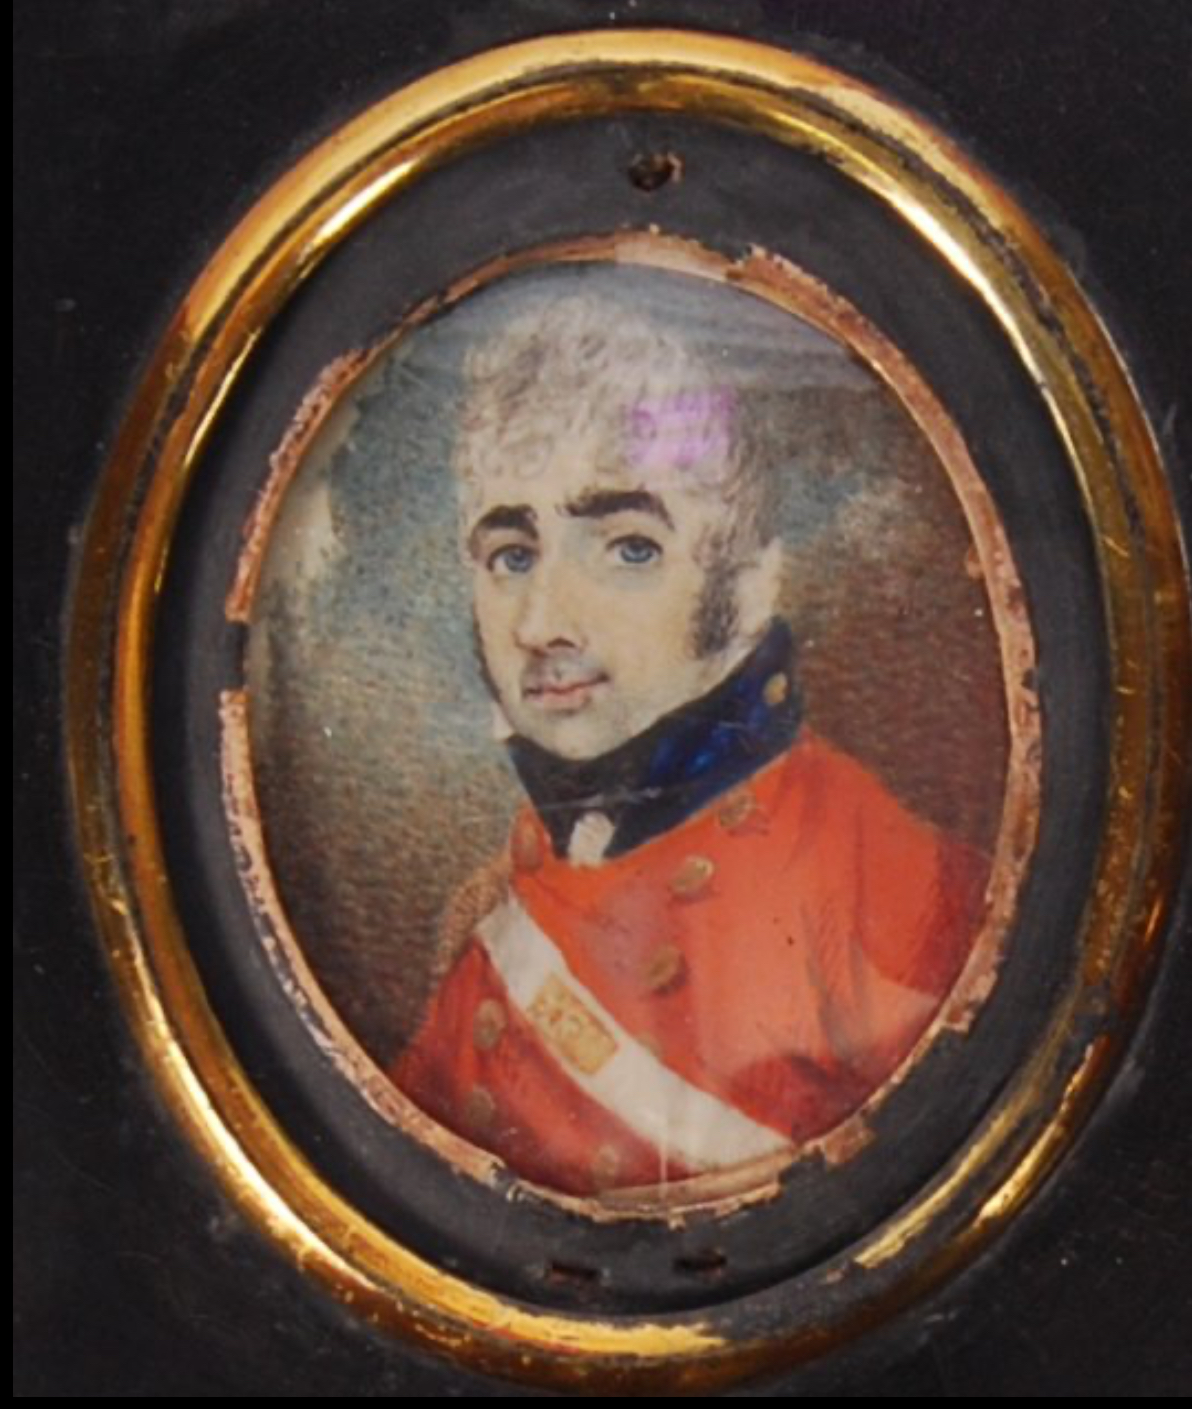 Antique portrait miniature of an officer - Image 2 of 2